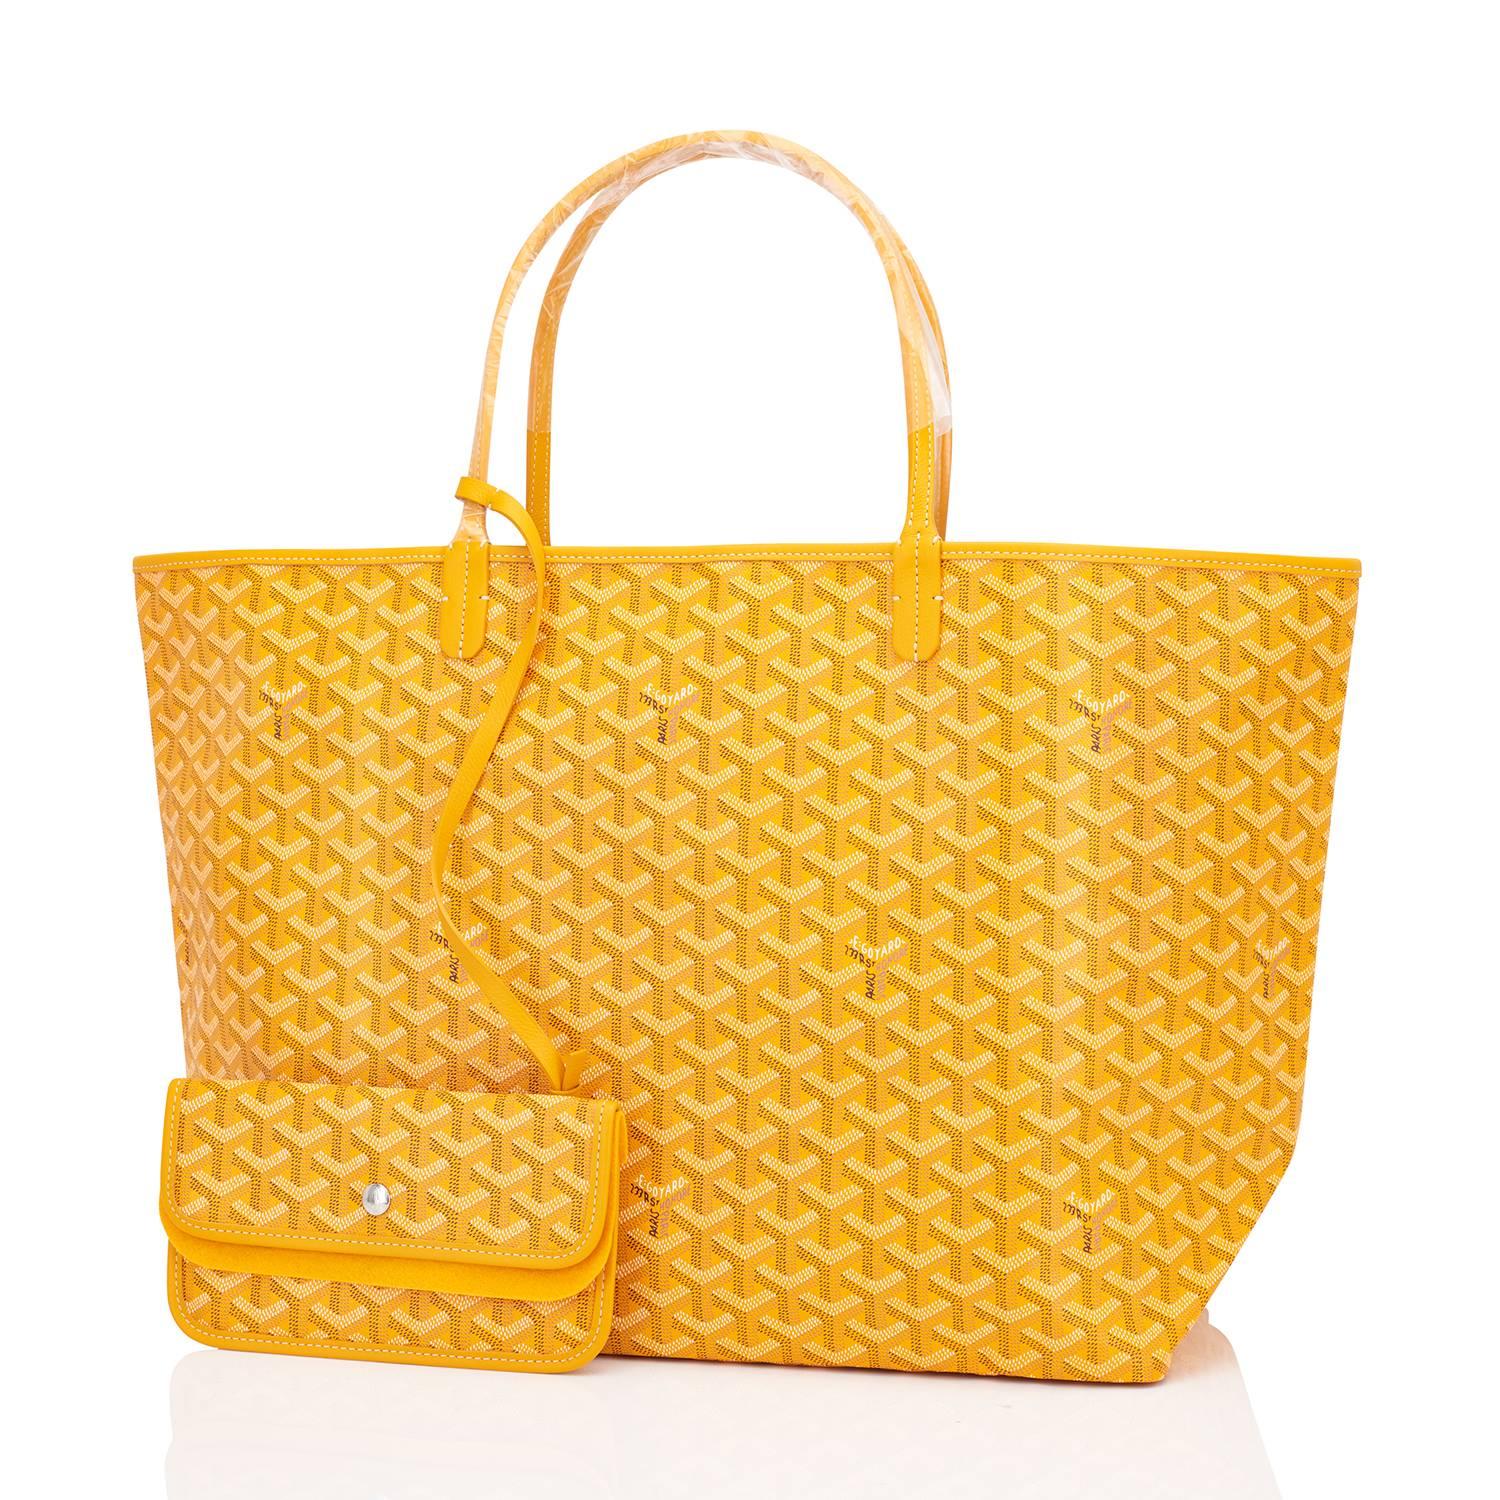 Goyard Jaune Yellow St Louis GM Chevron Tote Bag Celeb Fave 
Brand New in Box. Store Fresh. Pristine Condition (with plastic on handles) 
Perfect gift! Comes with yellow Goyard sleeper and inner organizational pochette. 
This is the famous Goyard